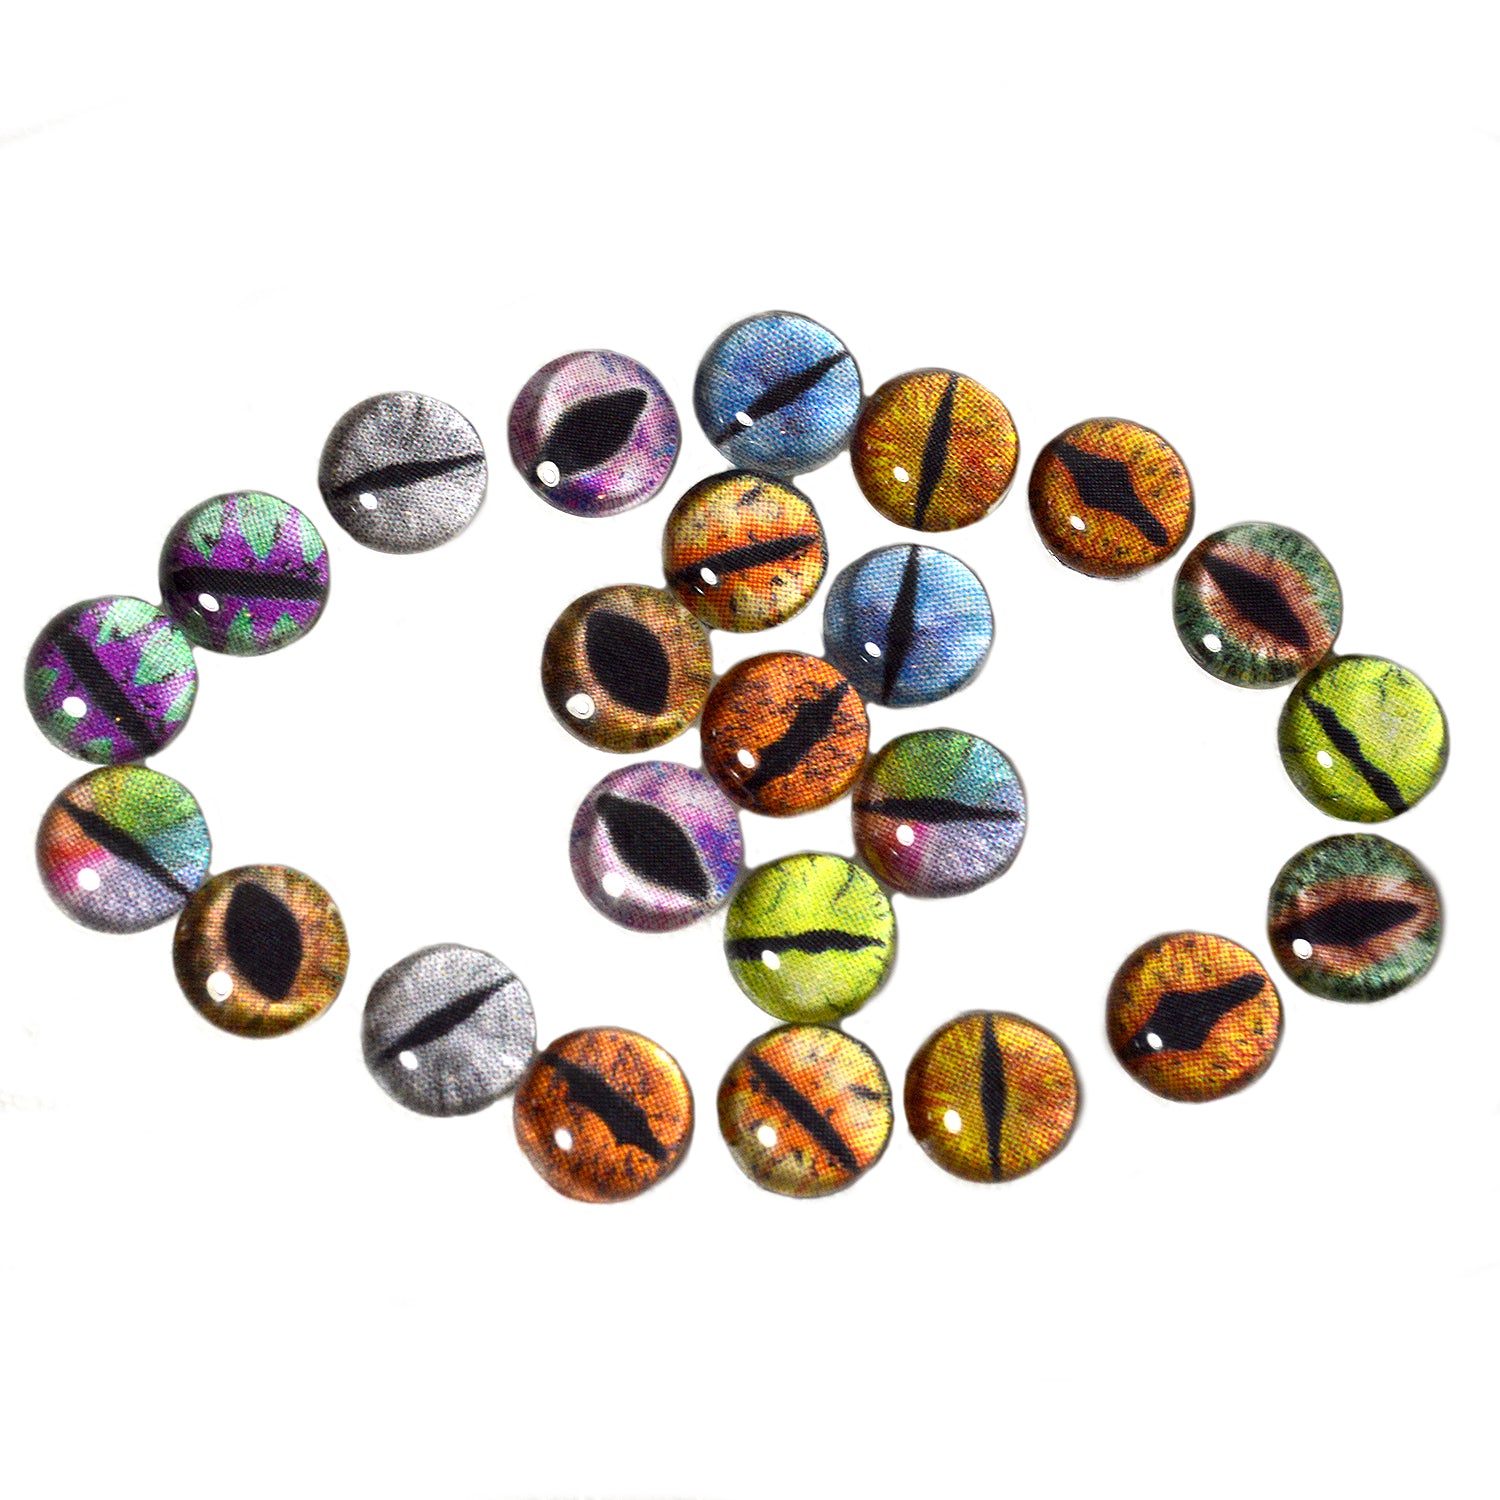 Safety Eye (Colored Iris), 2 pairs - 8mm, 10mm, 12mm